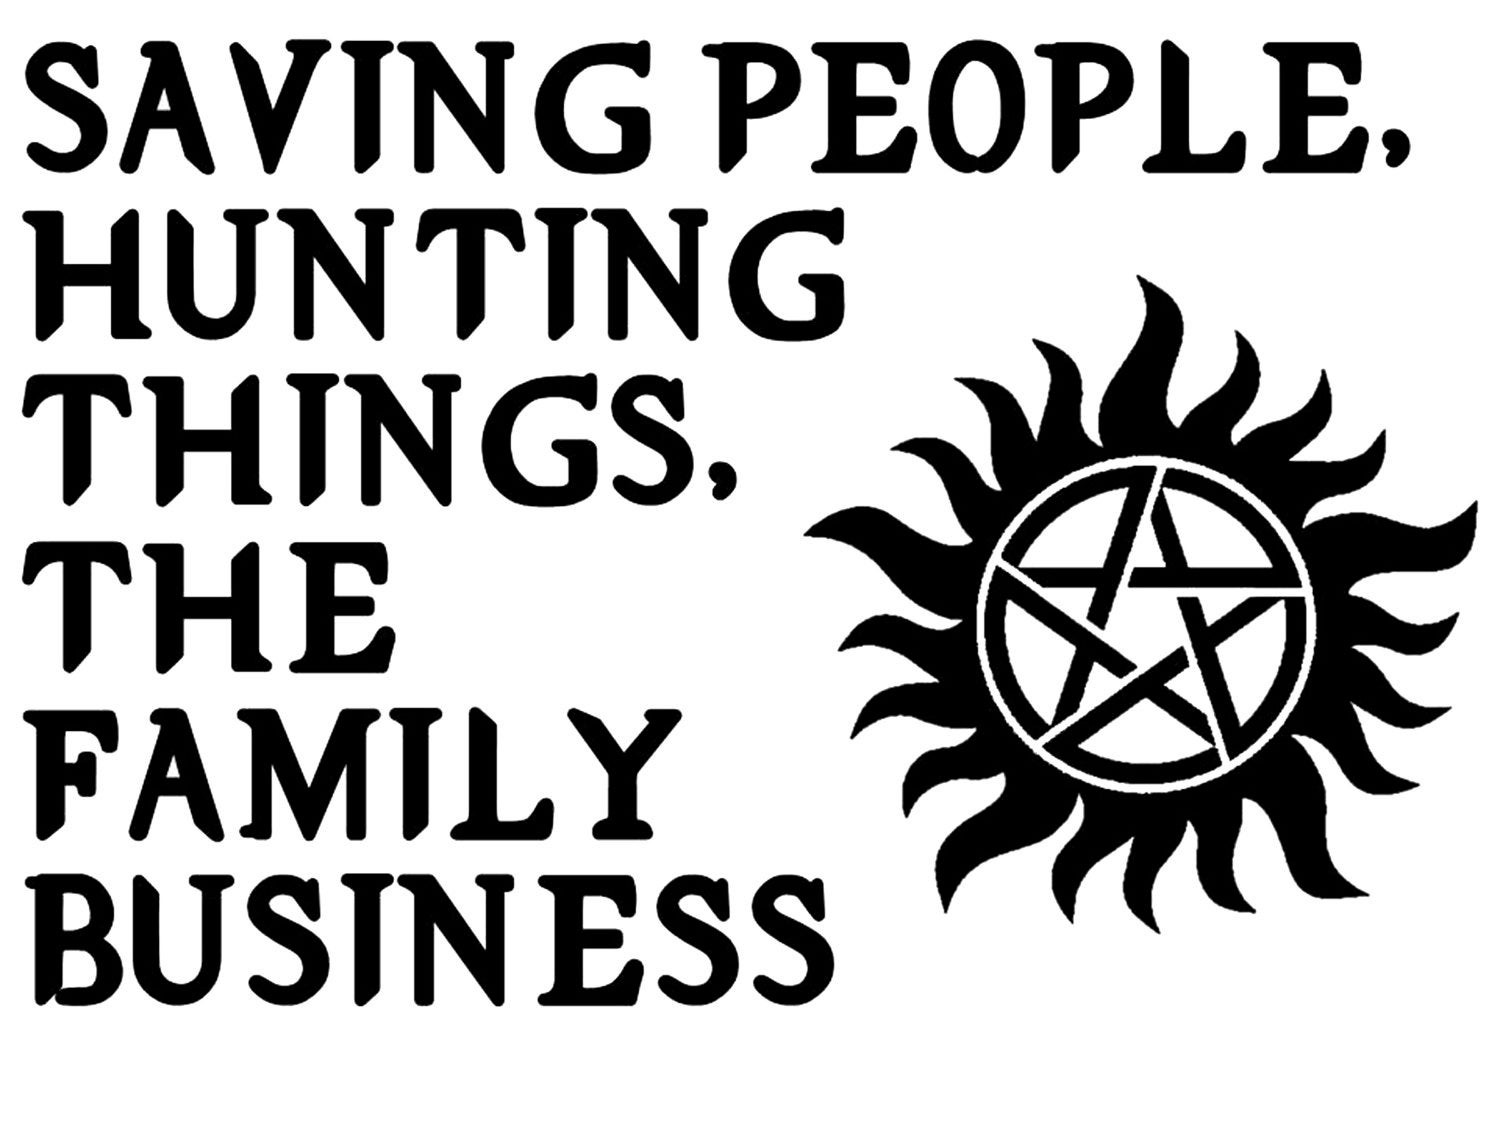 Supernatural Family Business Quote
 Supernatural Saving People Hunting Things The Family